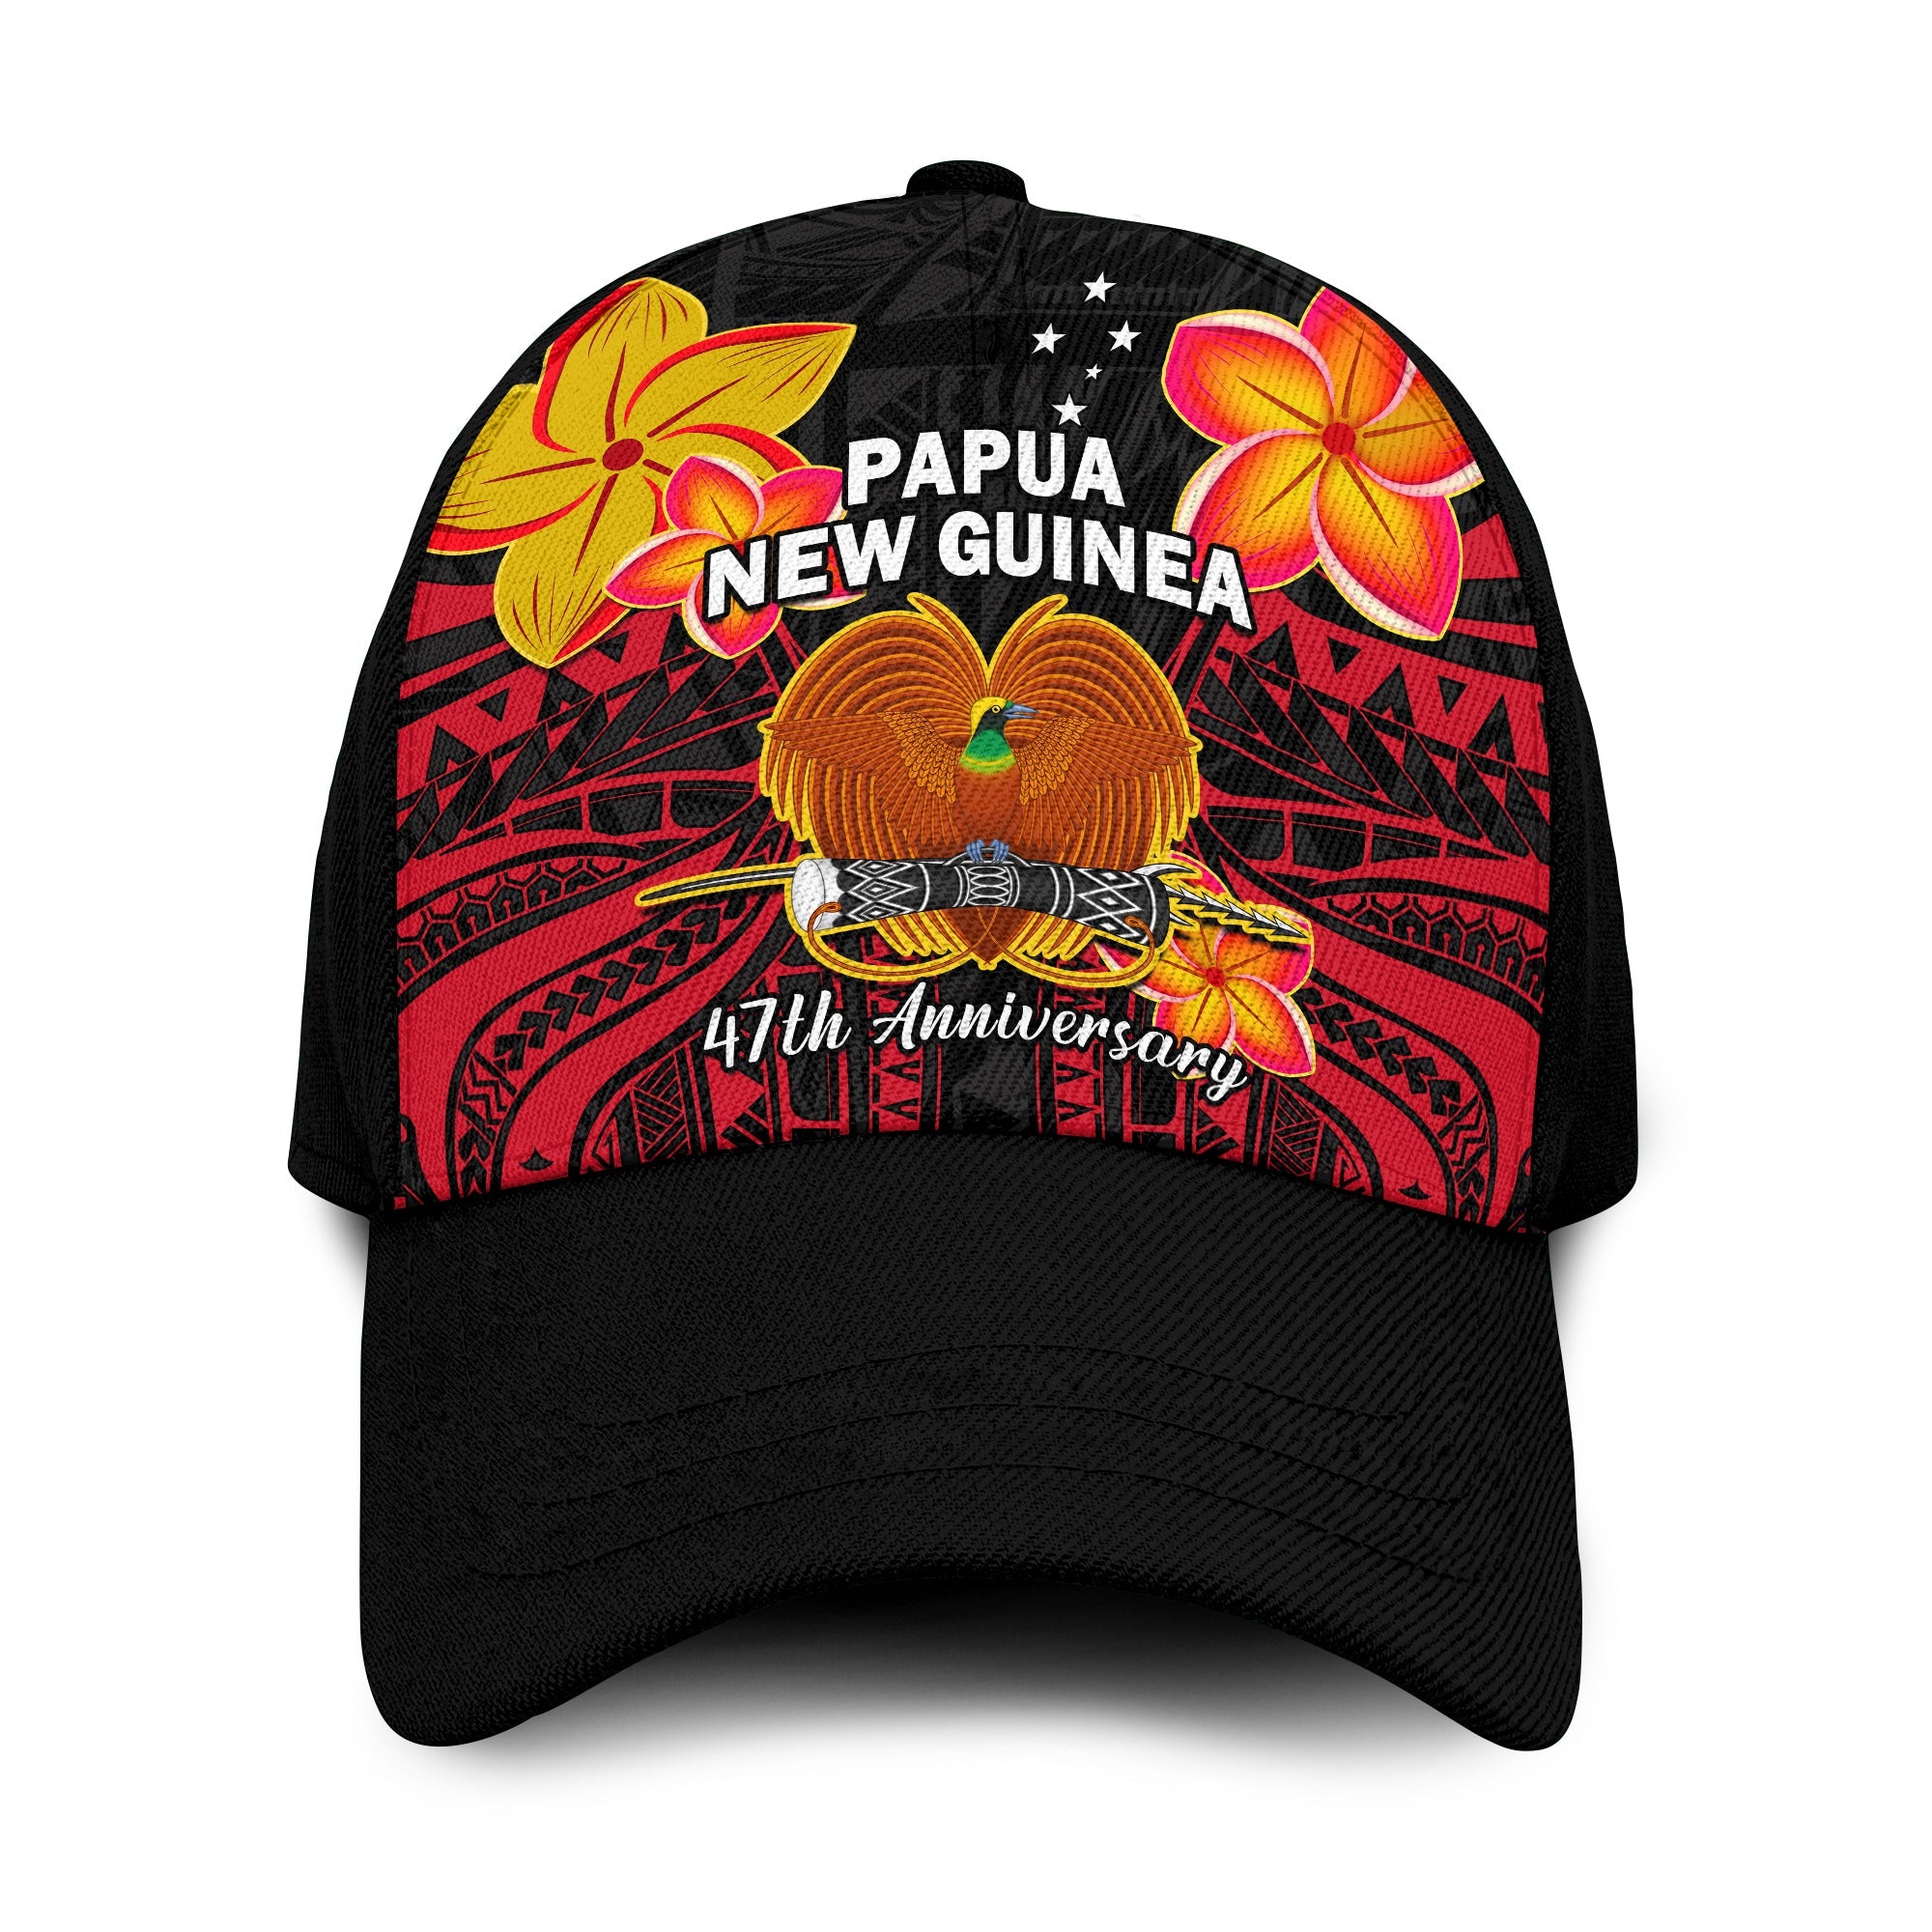 Papua New Guinea Classic Cap PNG 47 Years Independence Anniversary Ver.04 LT14 Classic Cap Universal Fit Red - Polynesian Pride